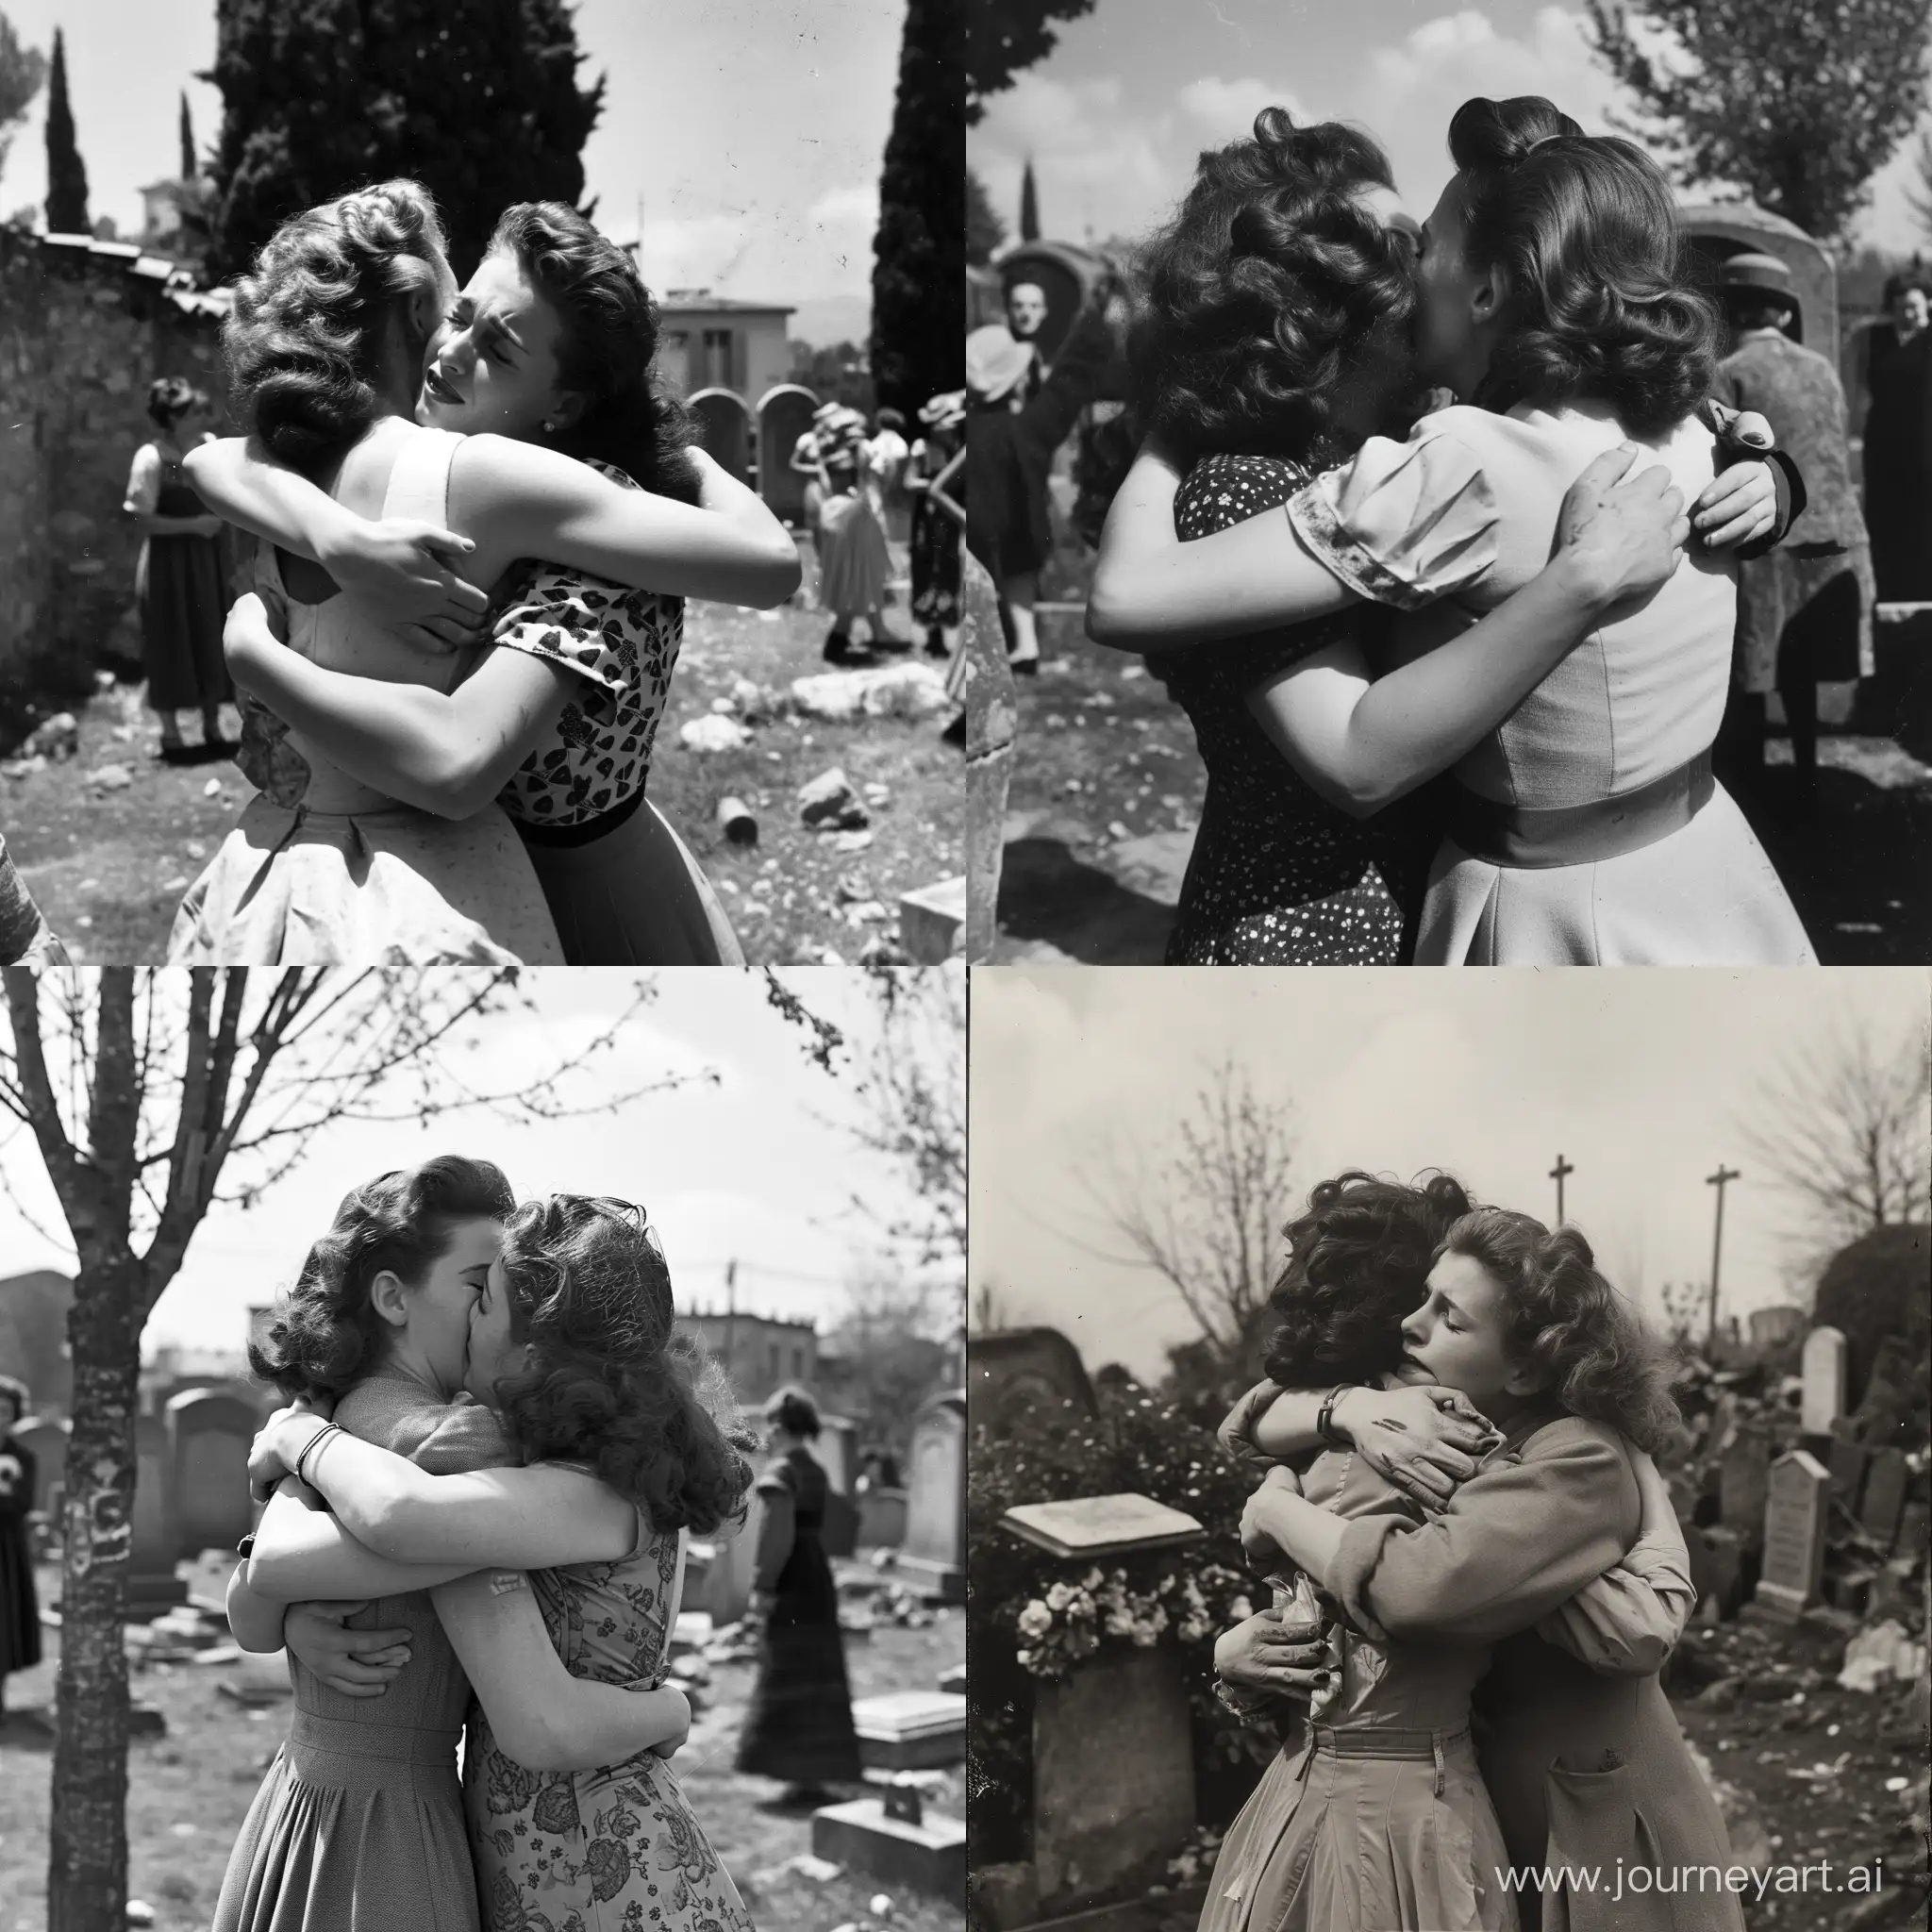 Lesbian-European-French-1950s-Photo-Embracing-Love-and-Tears-in-Puffy-Sleeves